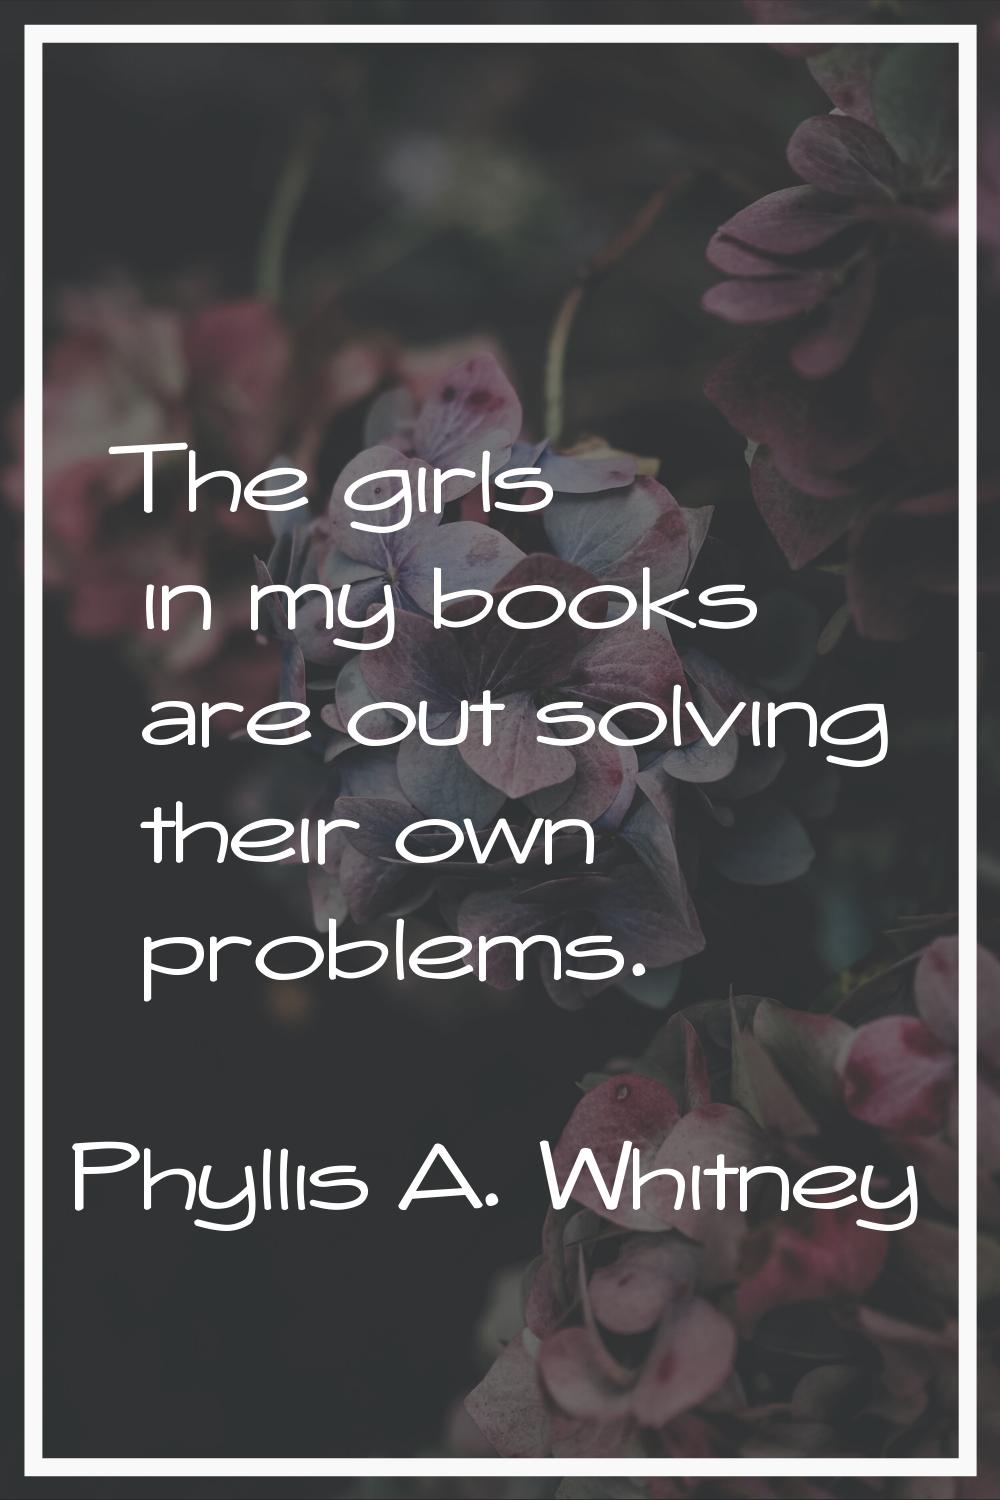 The girls in my books are out solving their own problems.